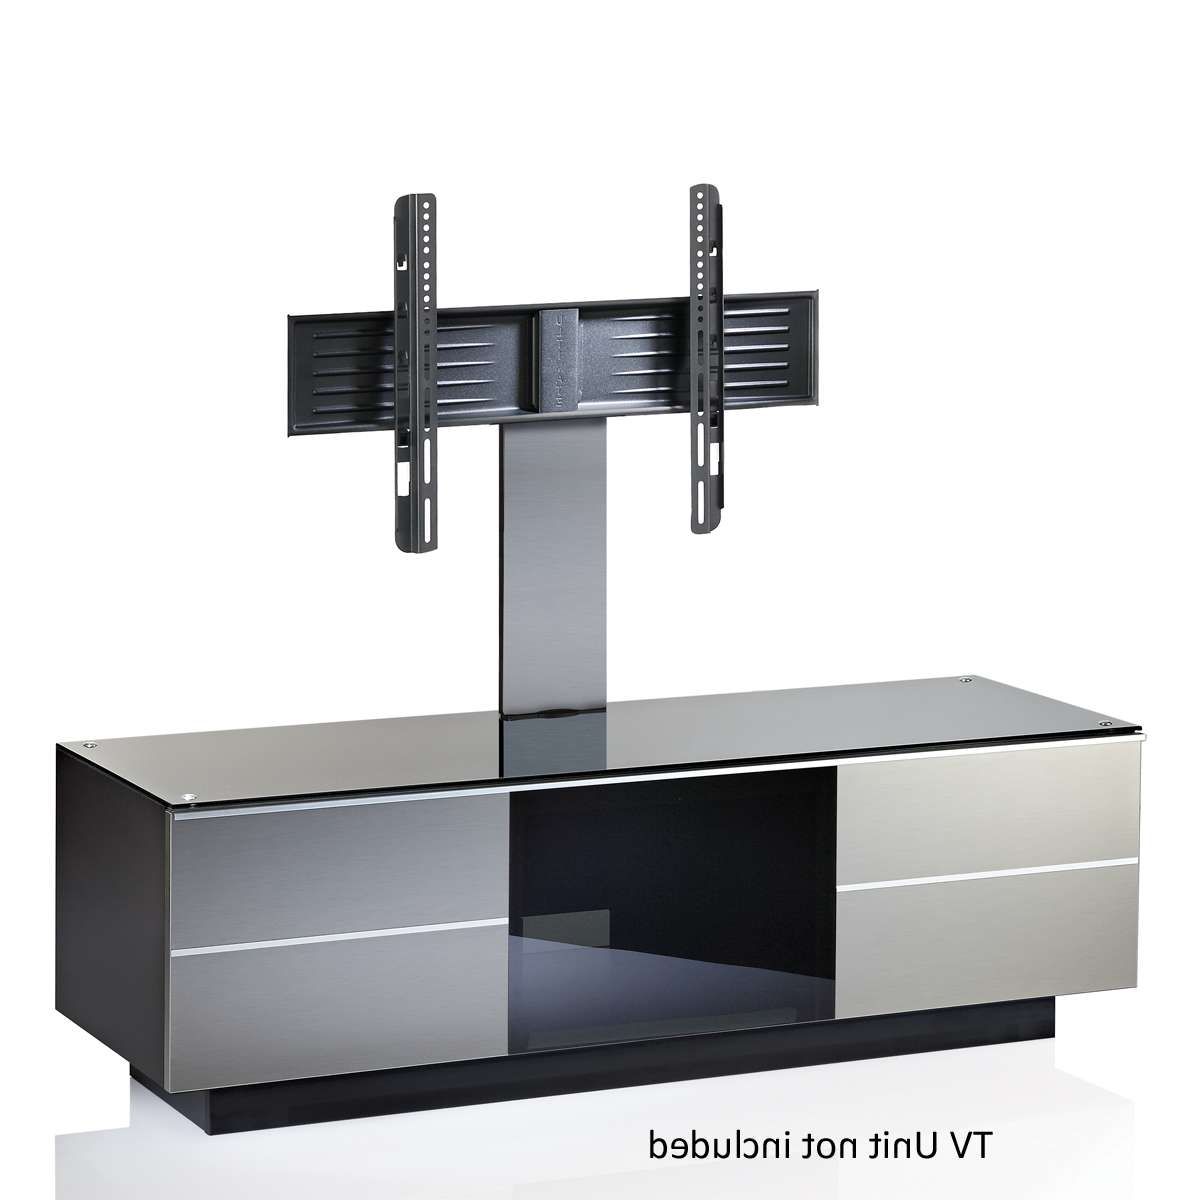 Inox G B 80 Inx Cantilever Tv Bracket,ukcf Ultimate,,uk Cf Pertaining To Tv Stands With Bracket (View 14 of 15)